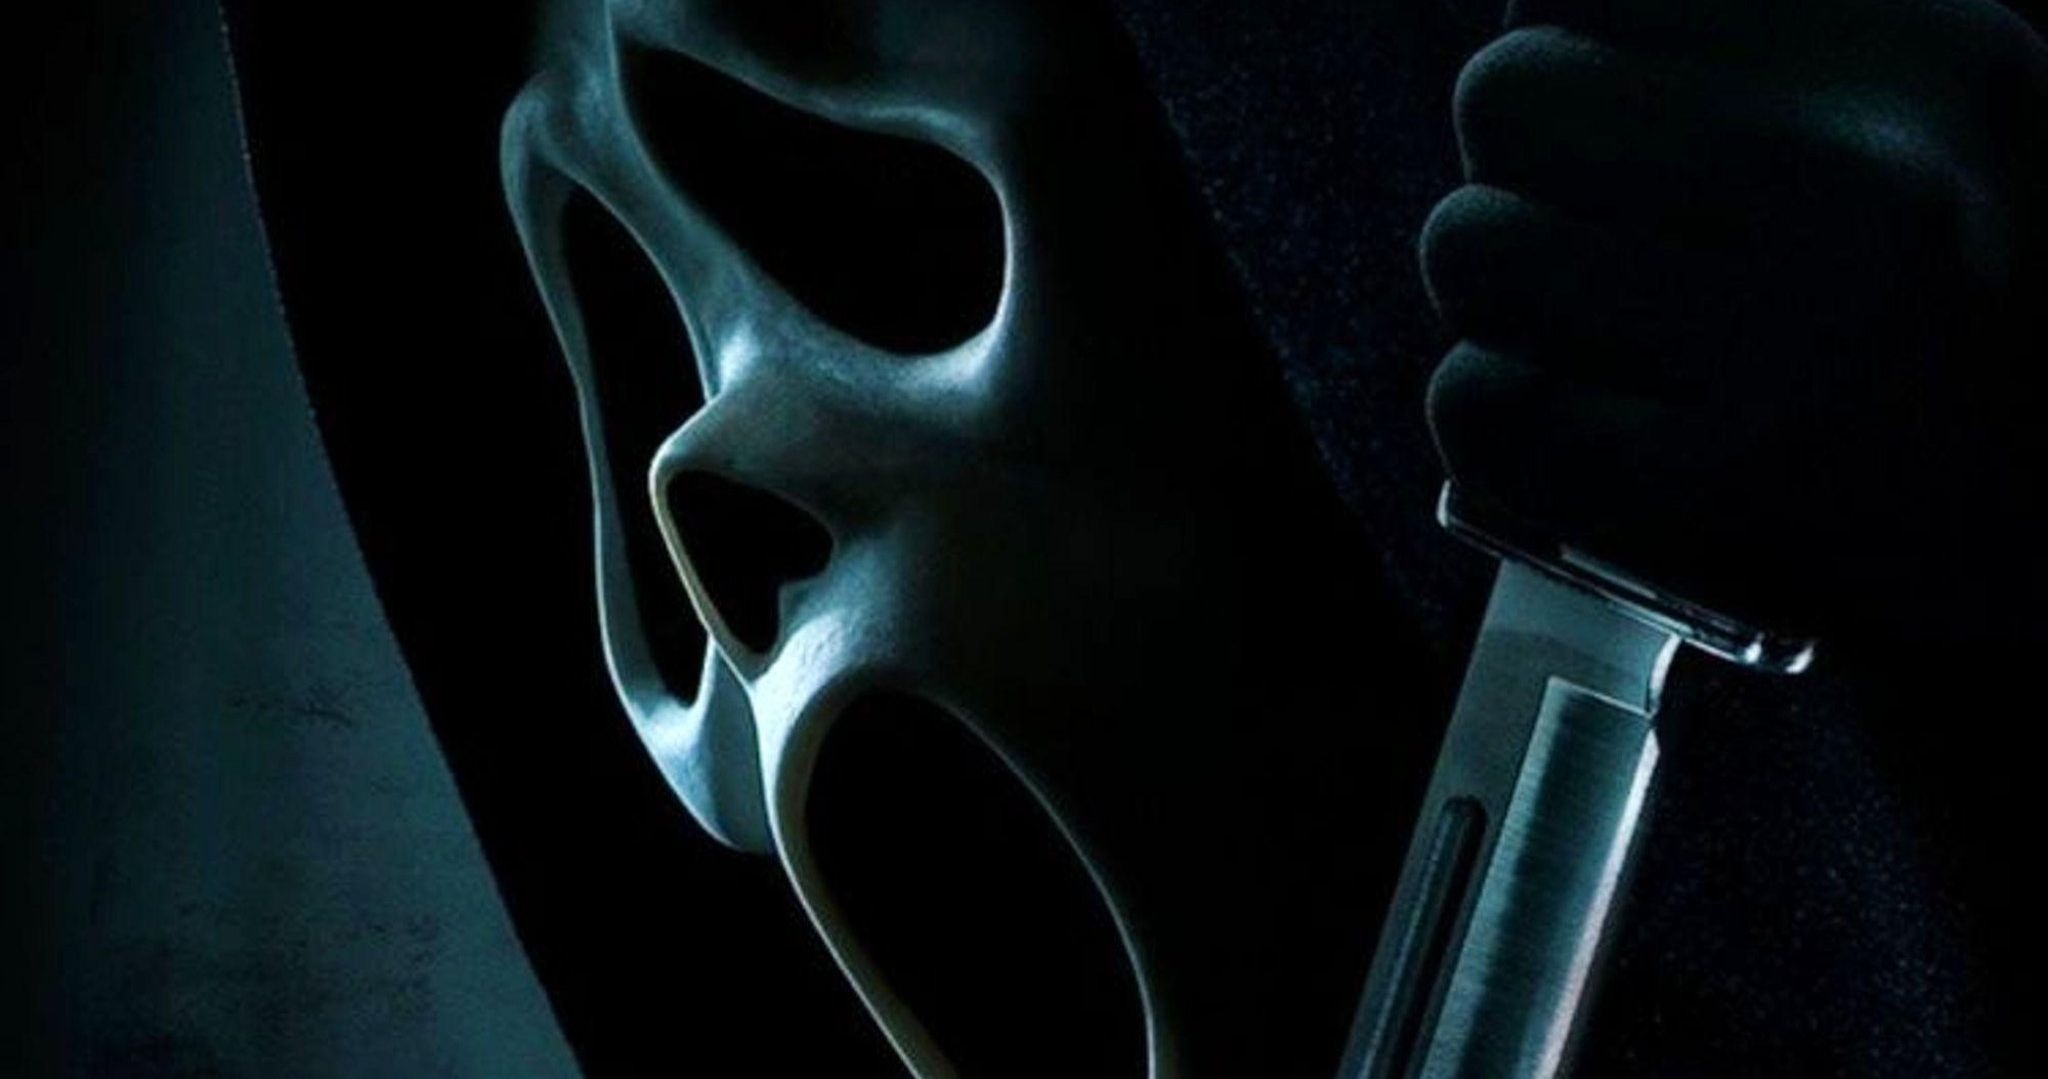 Scream Director Believes There's Room for More Sequels